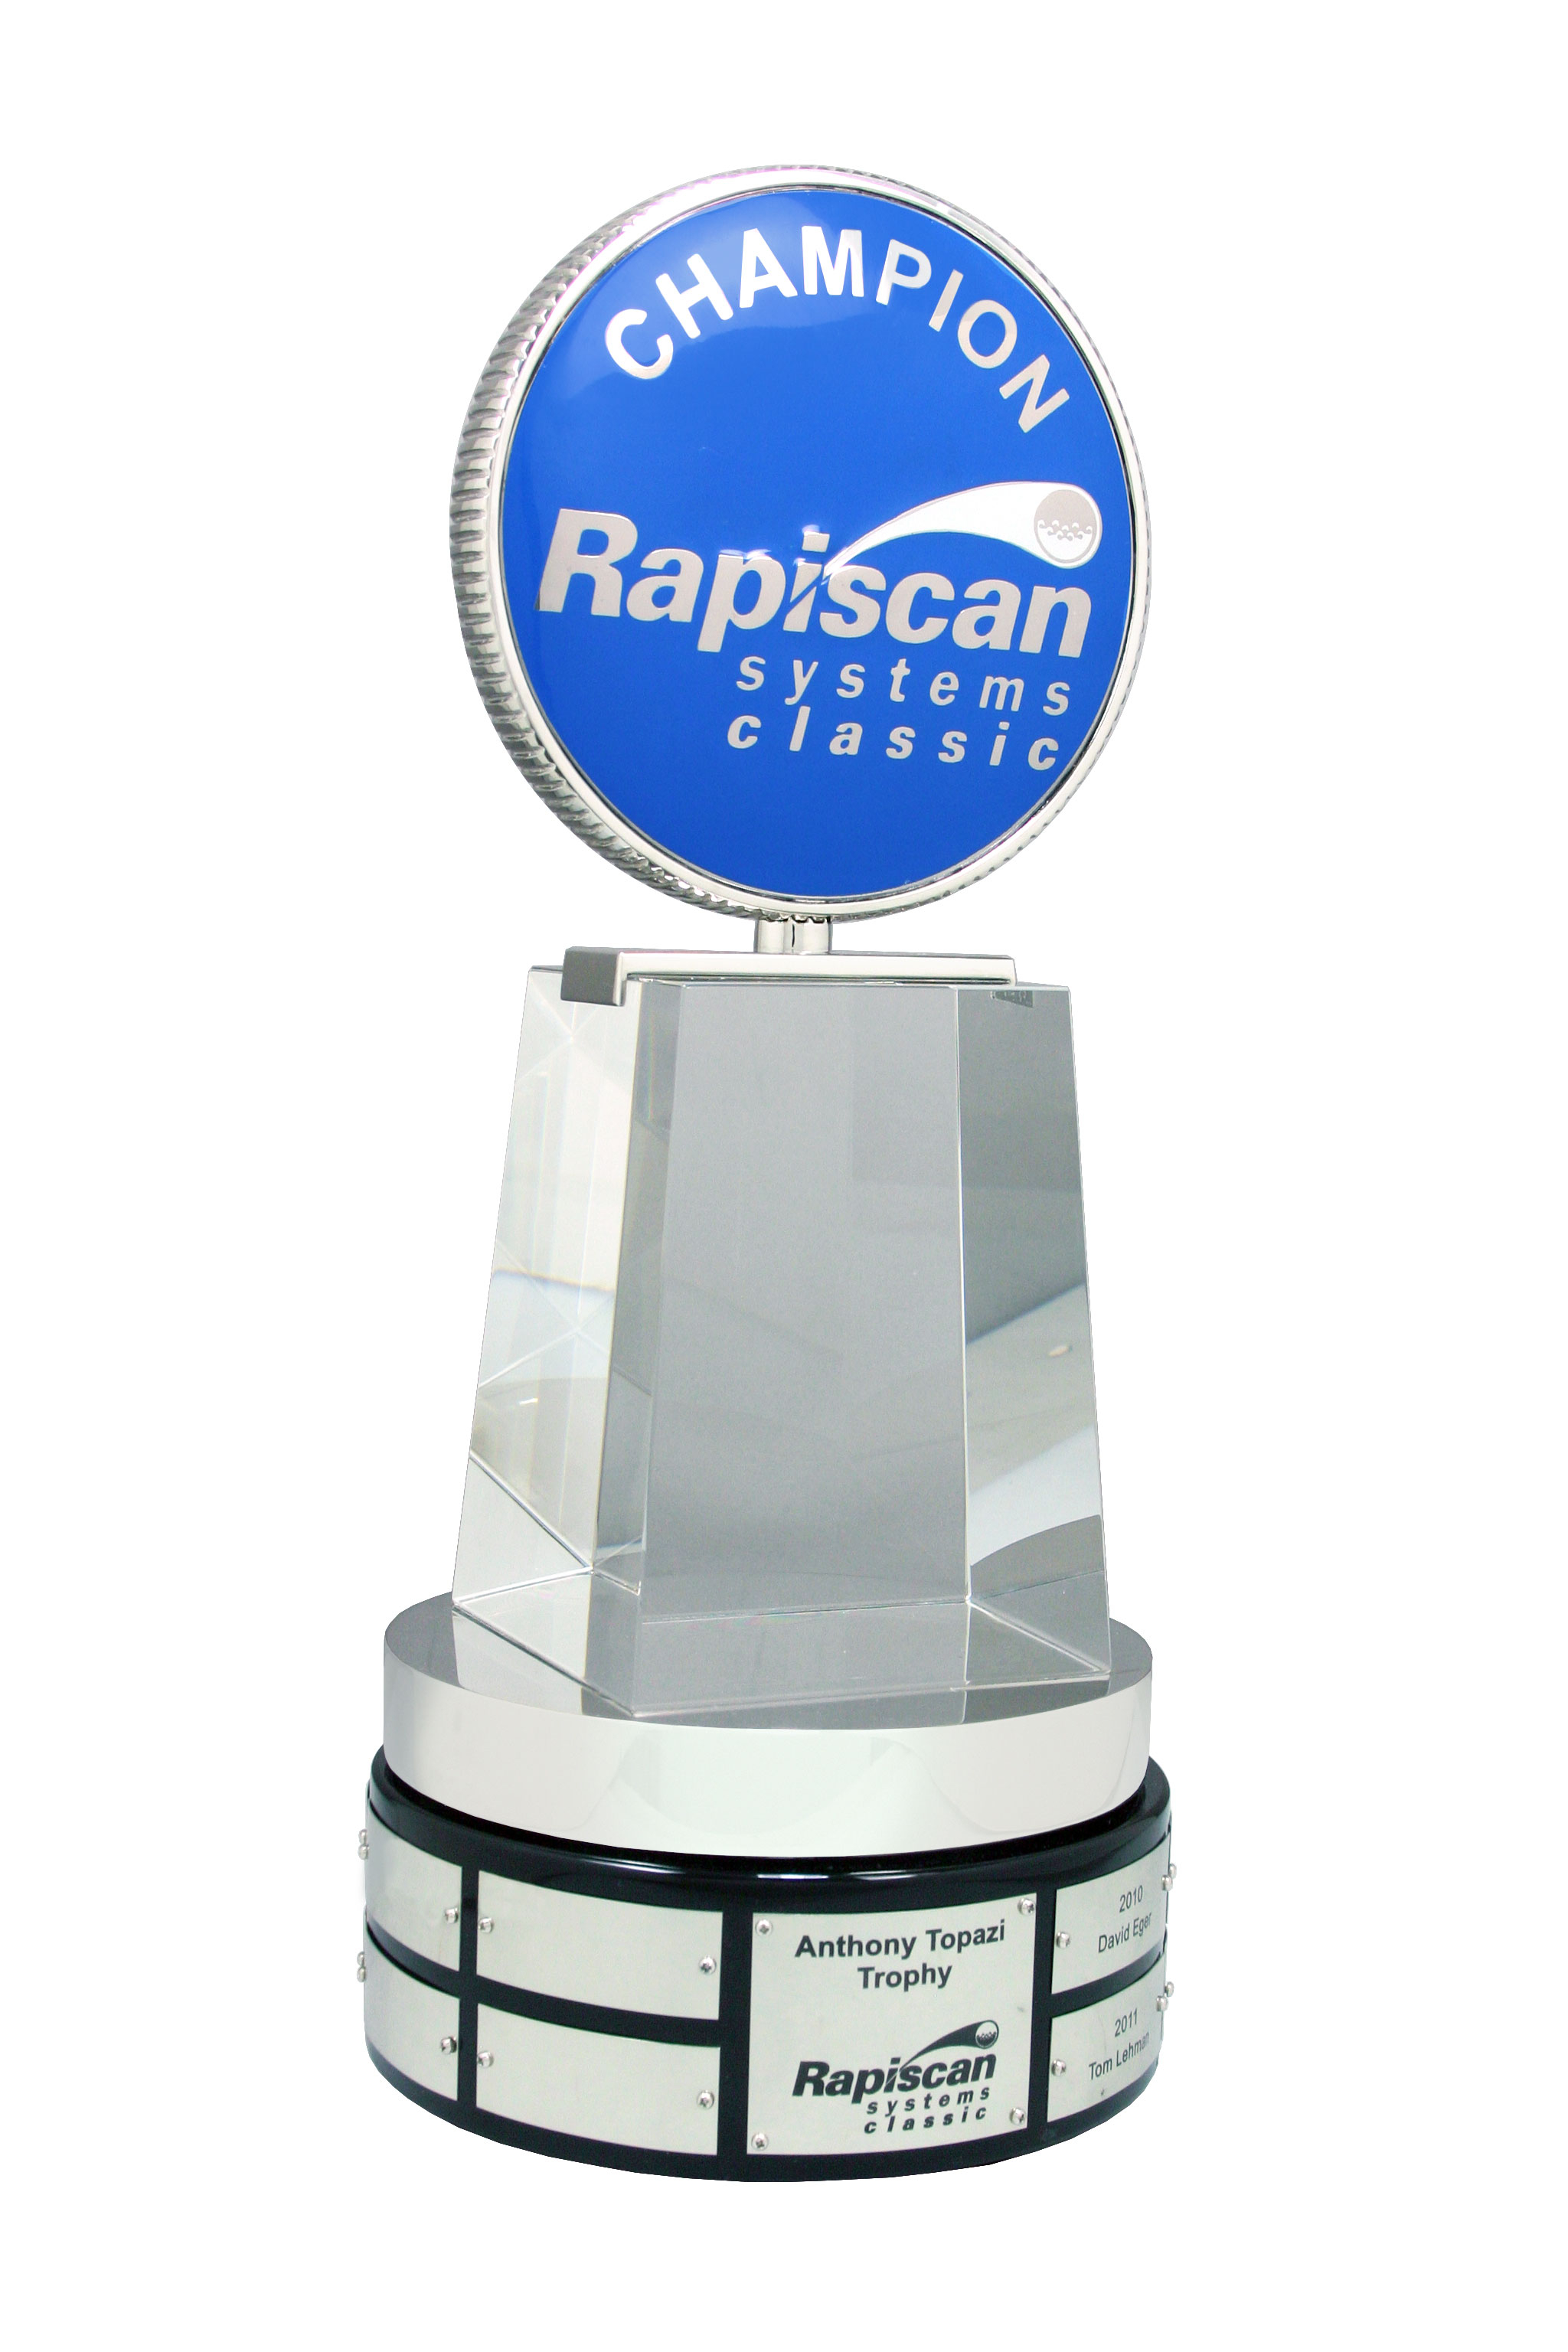 Rapiscan Systems Classic Trophy